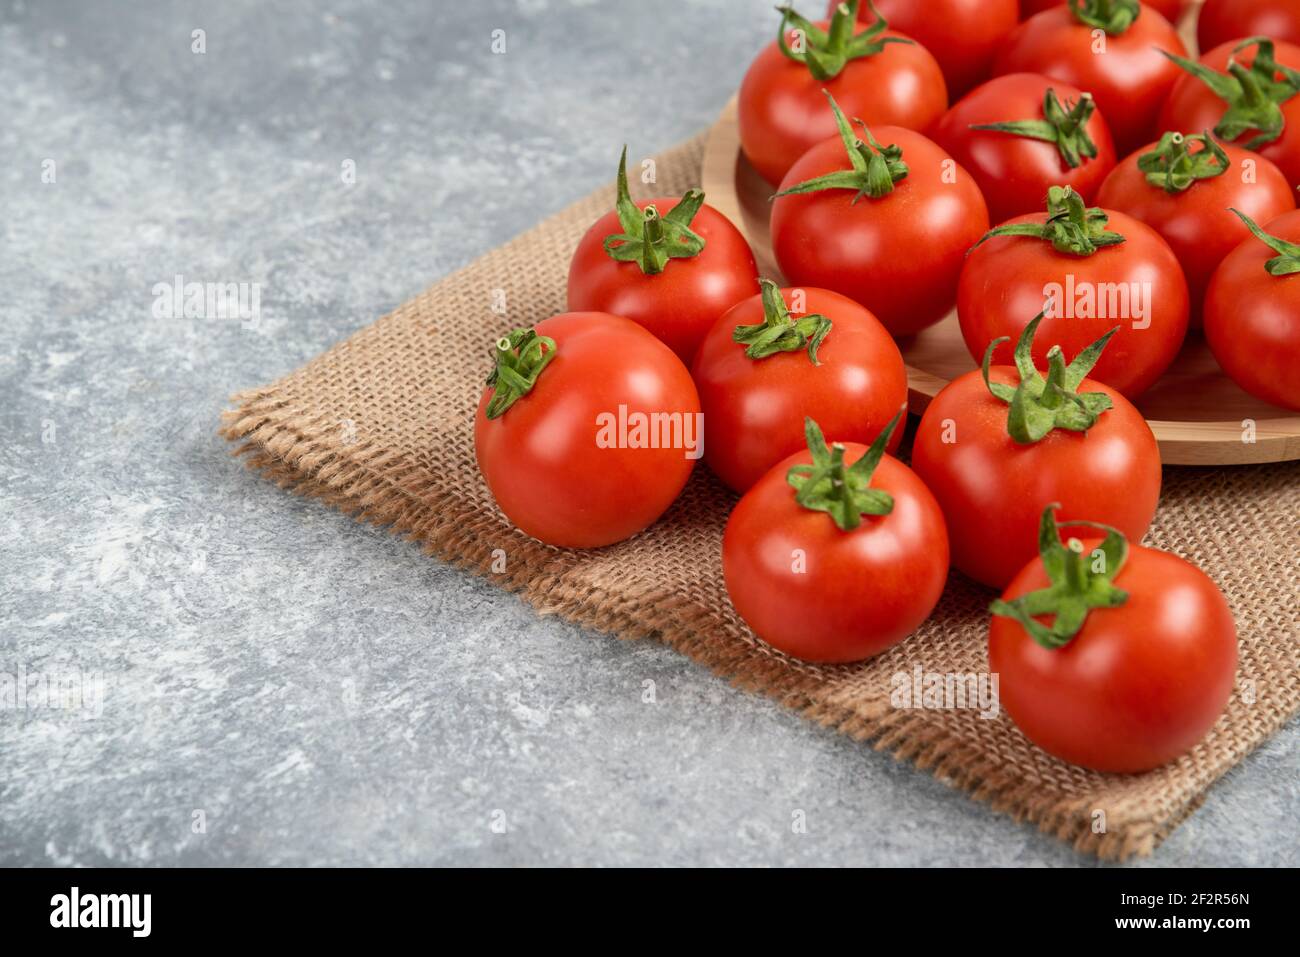 Bunch of red fresh tomatoes with sack cloth on marble surface Stock Photo